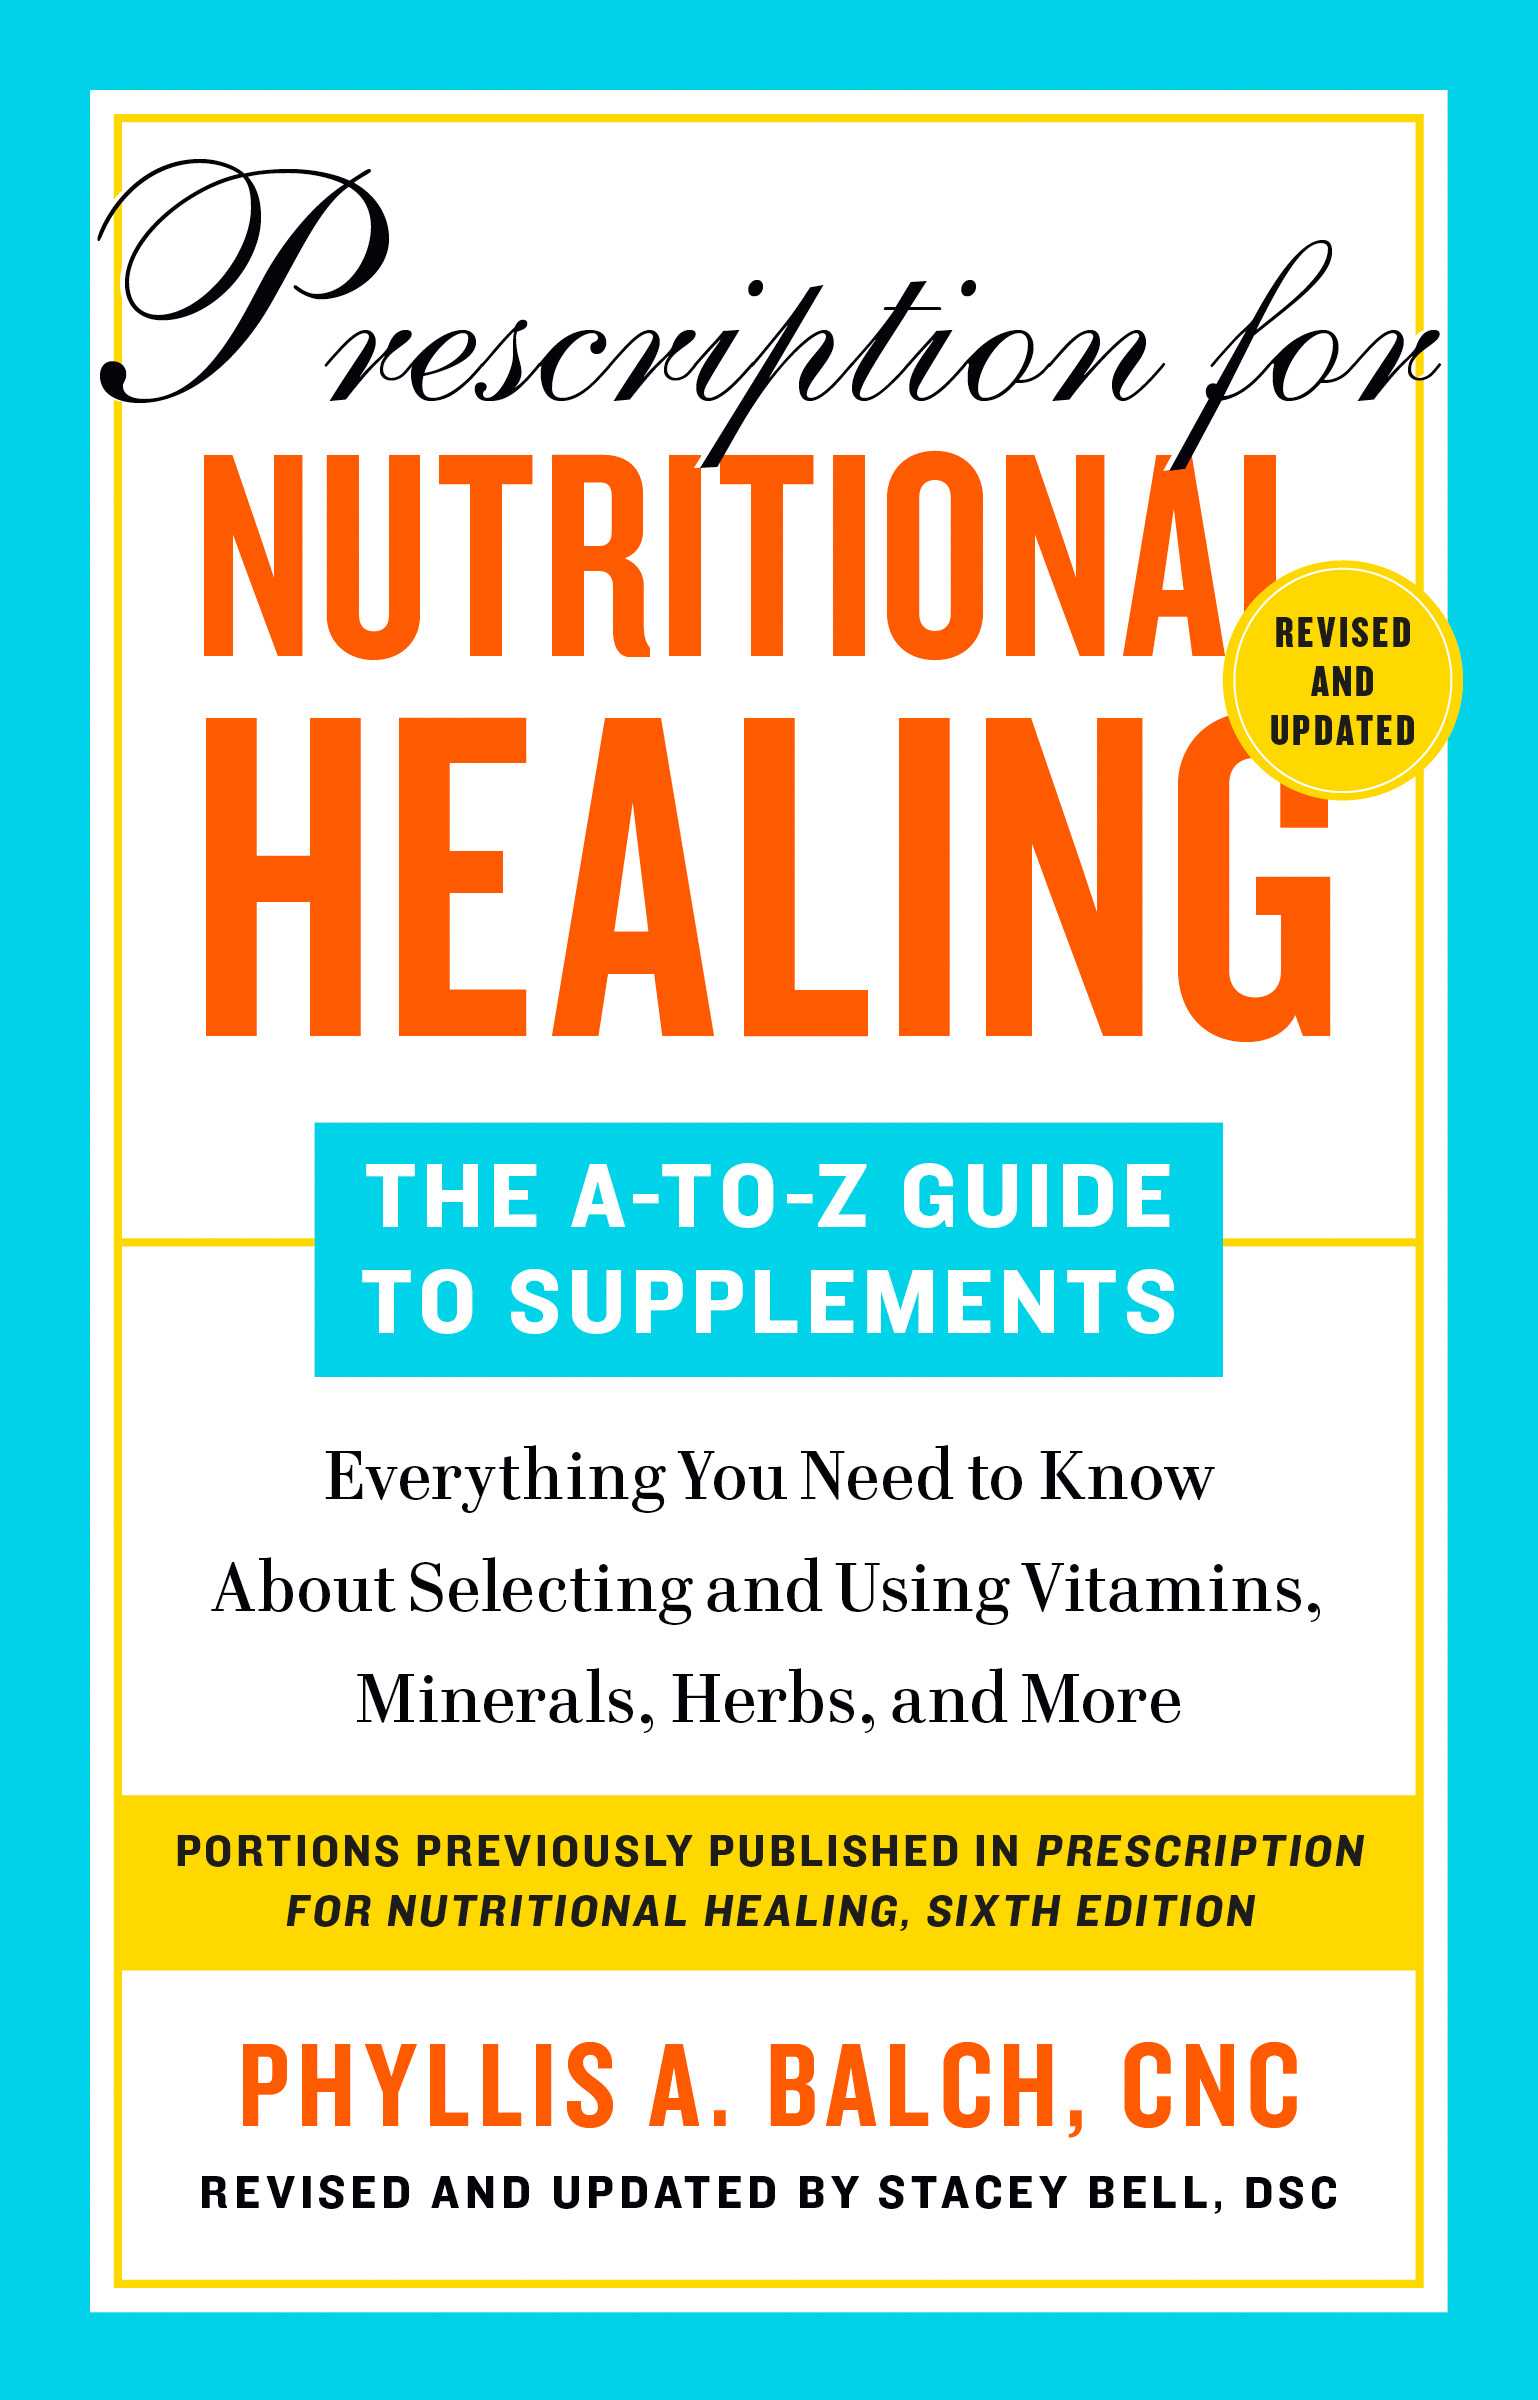 Prescription for Nutritional Healing: The A-to-Z Guide to Supplements (6th Edition)